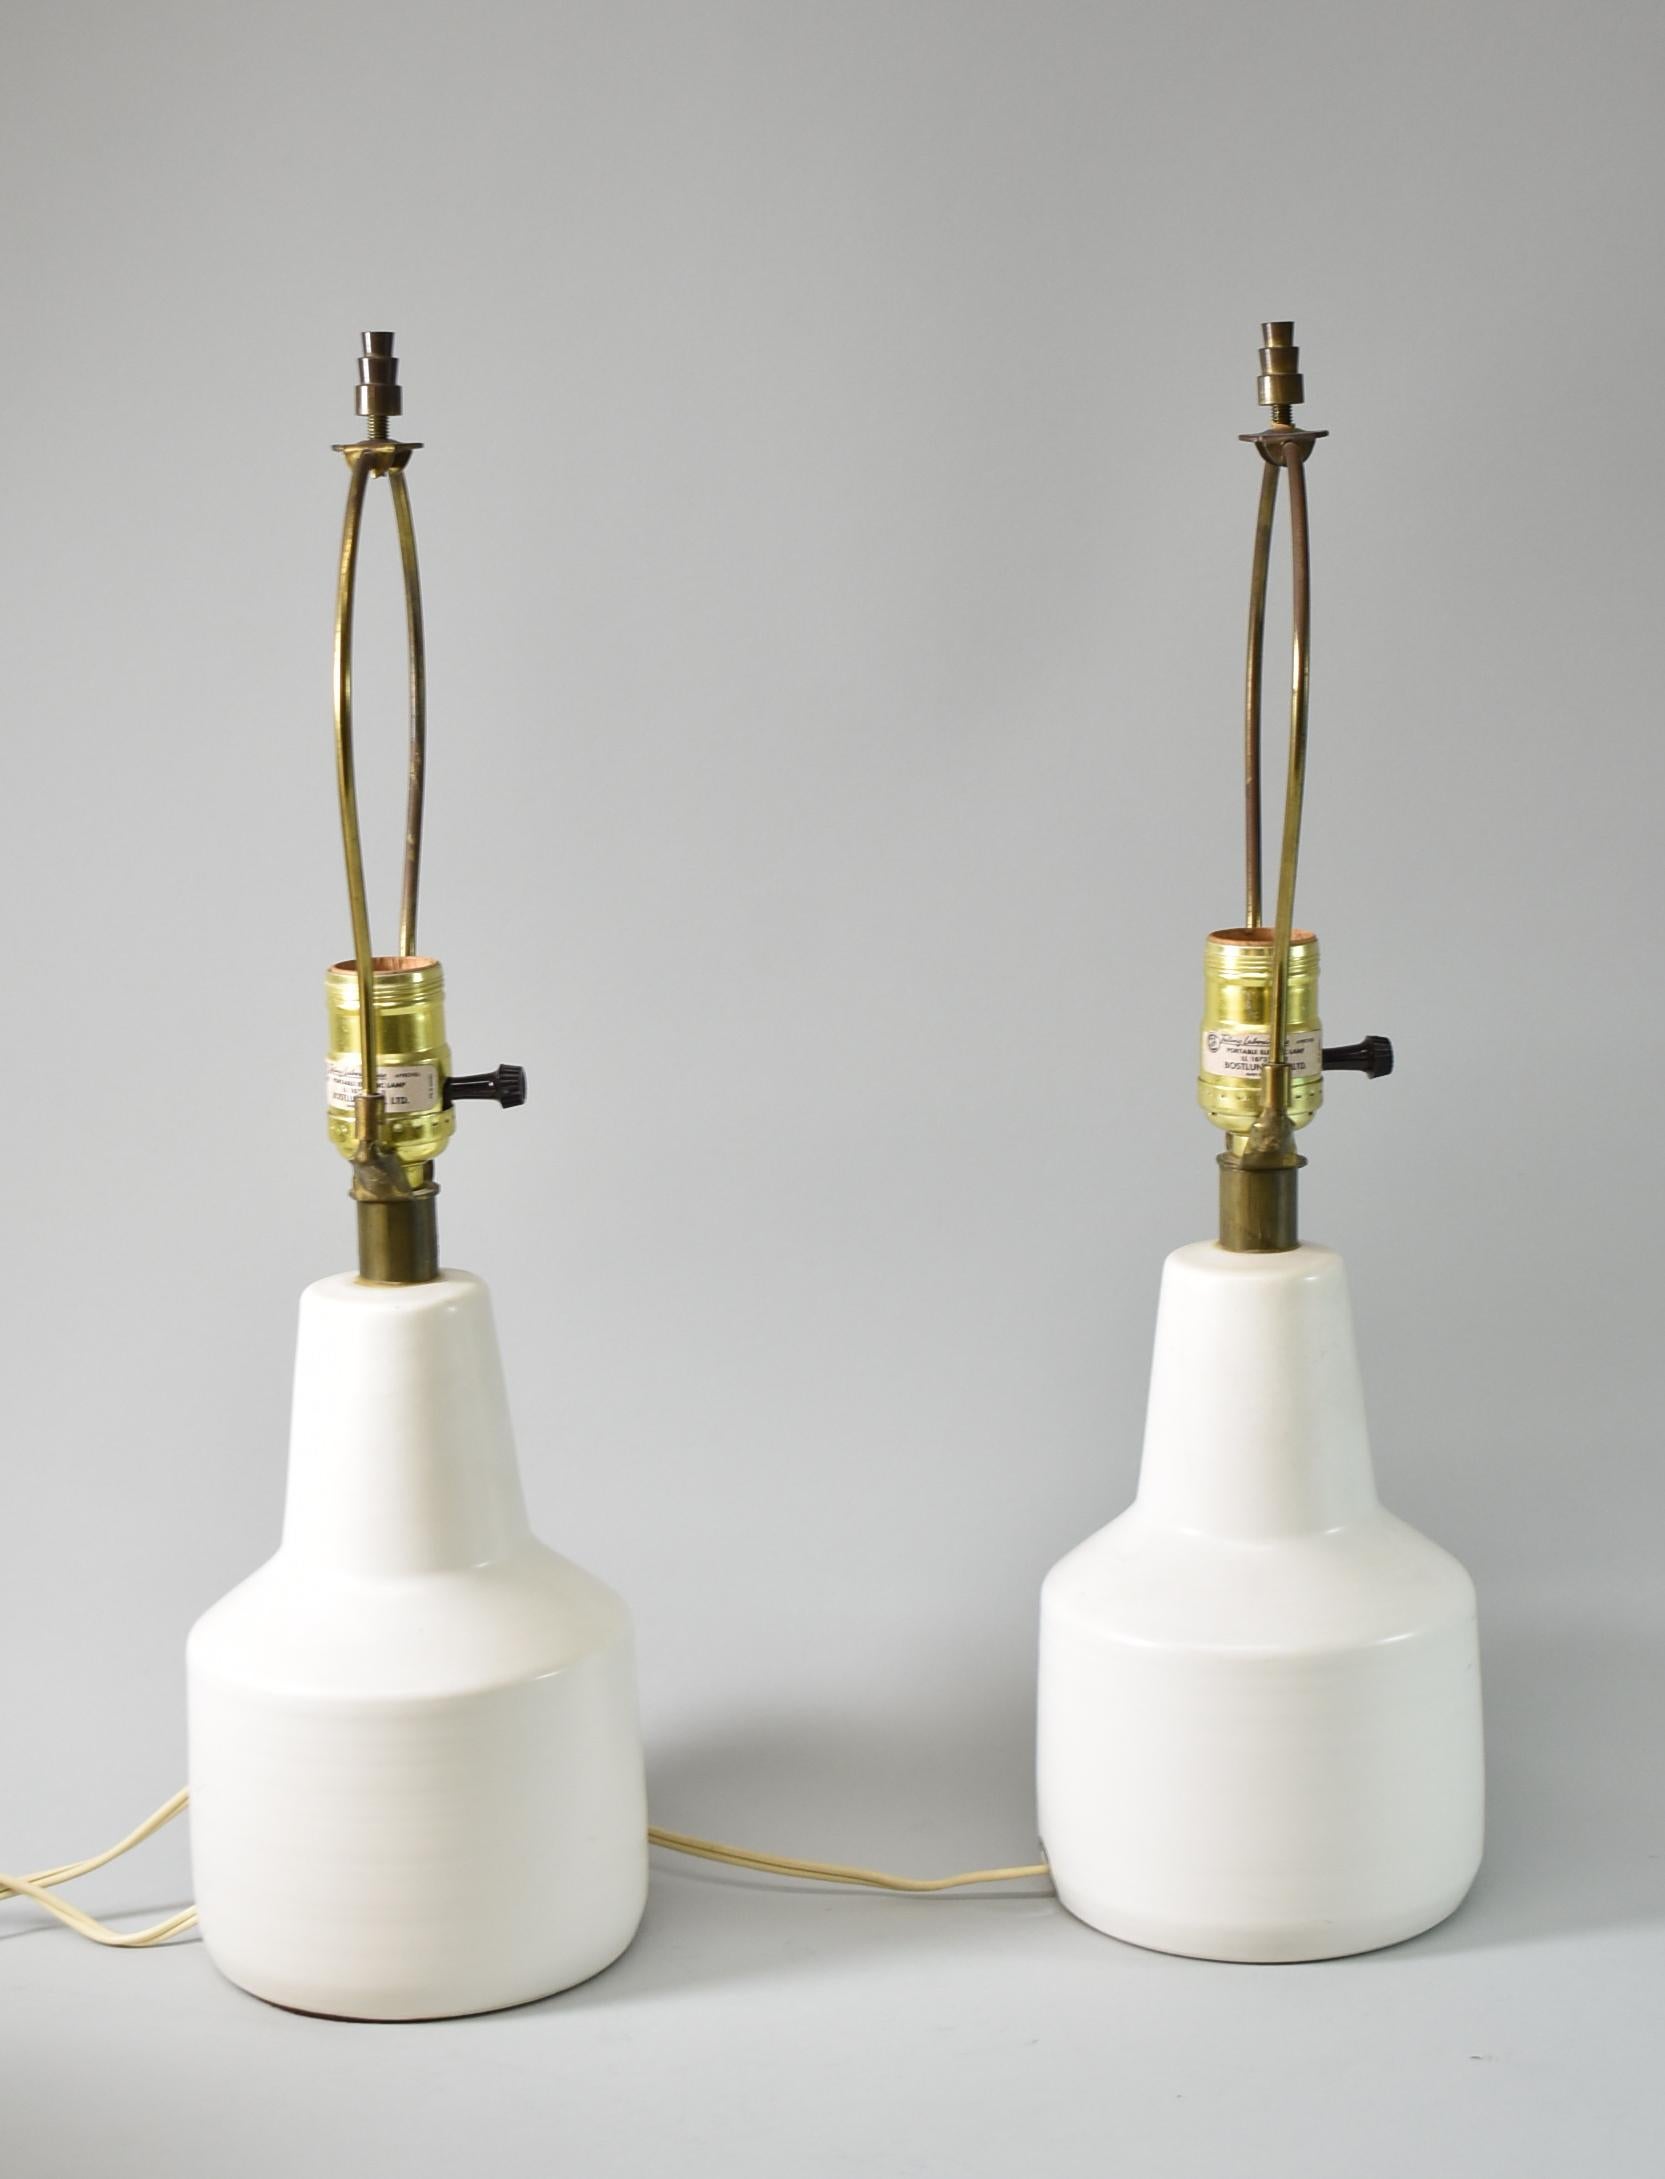 North American Pr. intage Mid Century Modern Lotte & Gunnar Bostlund Table Lamps Pottery 1960's